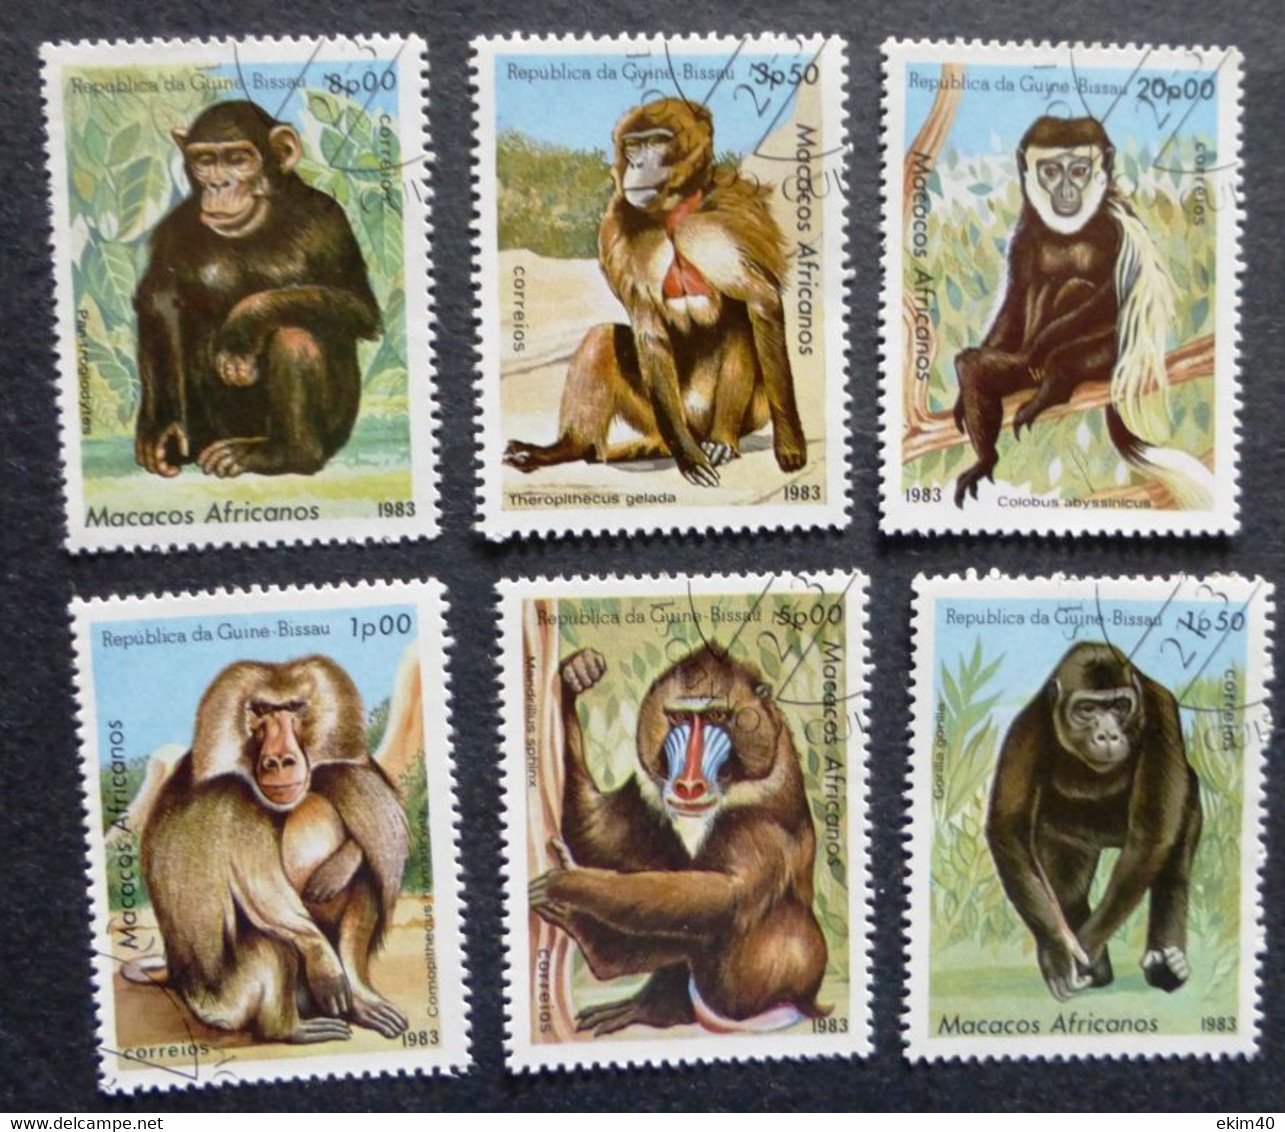 Selection Of Used/Cancelled Stamps From Guinne Bissau Wild Animals. No DC-376 - Used Stamps